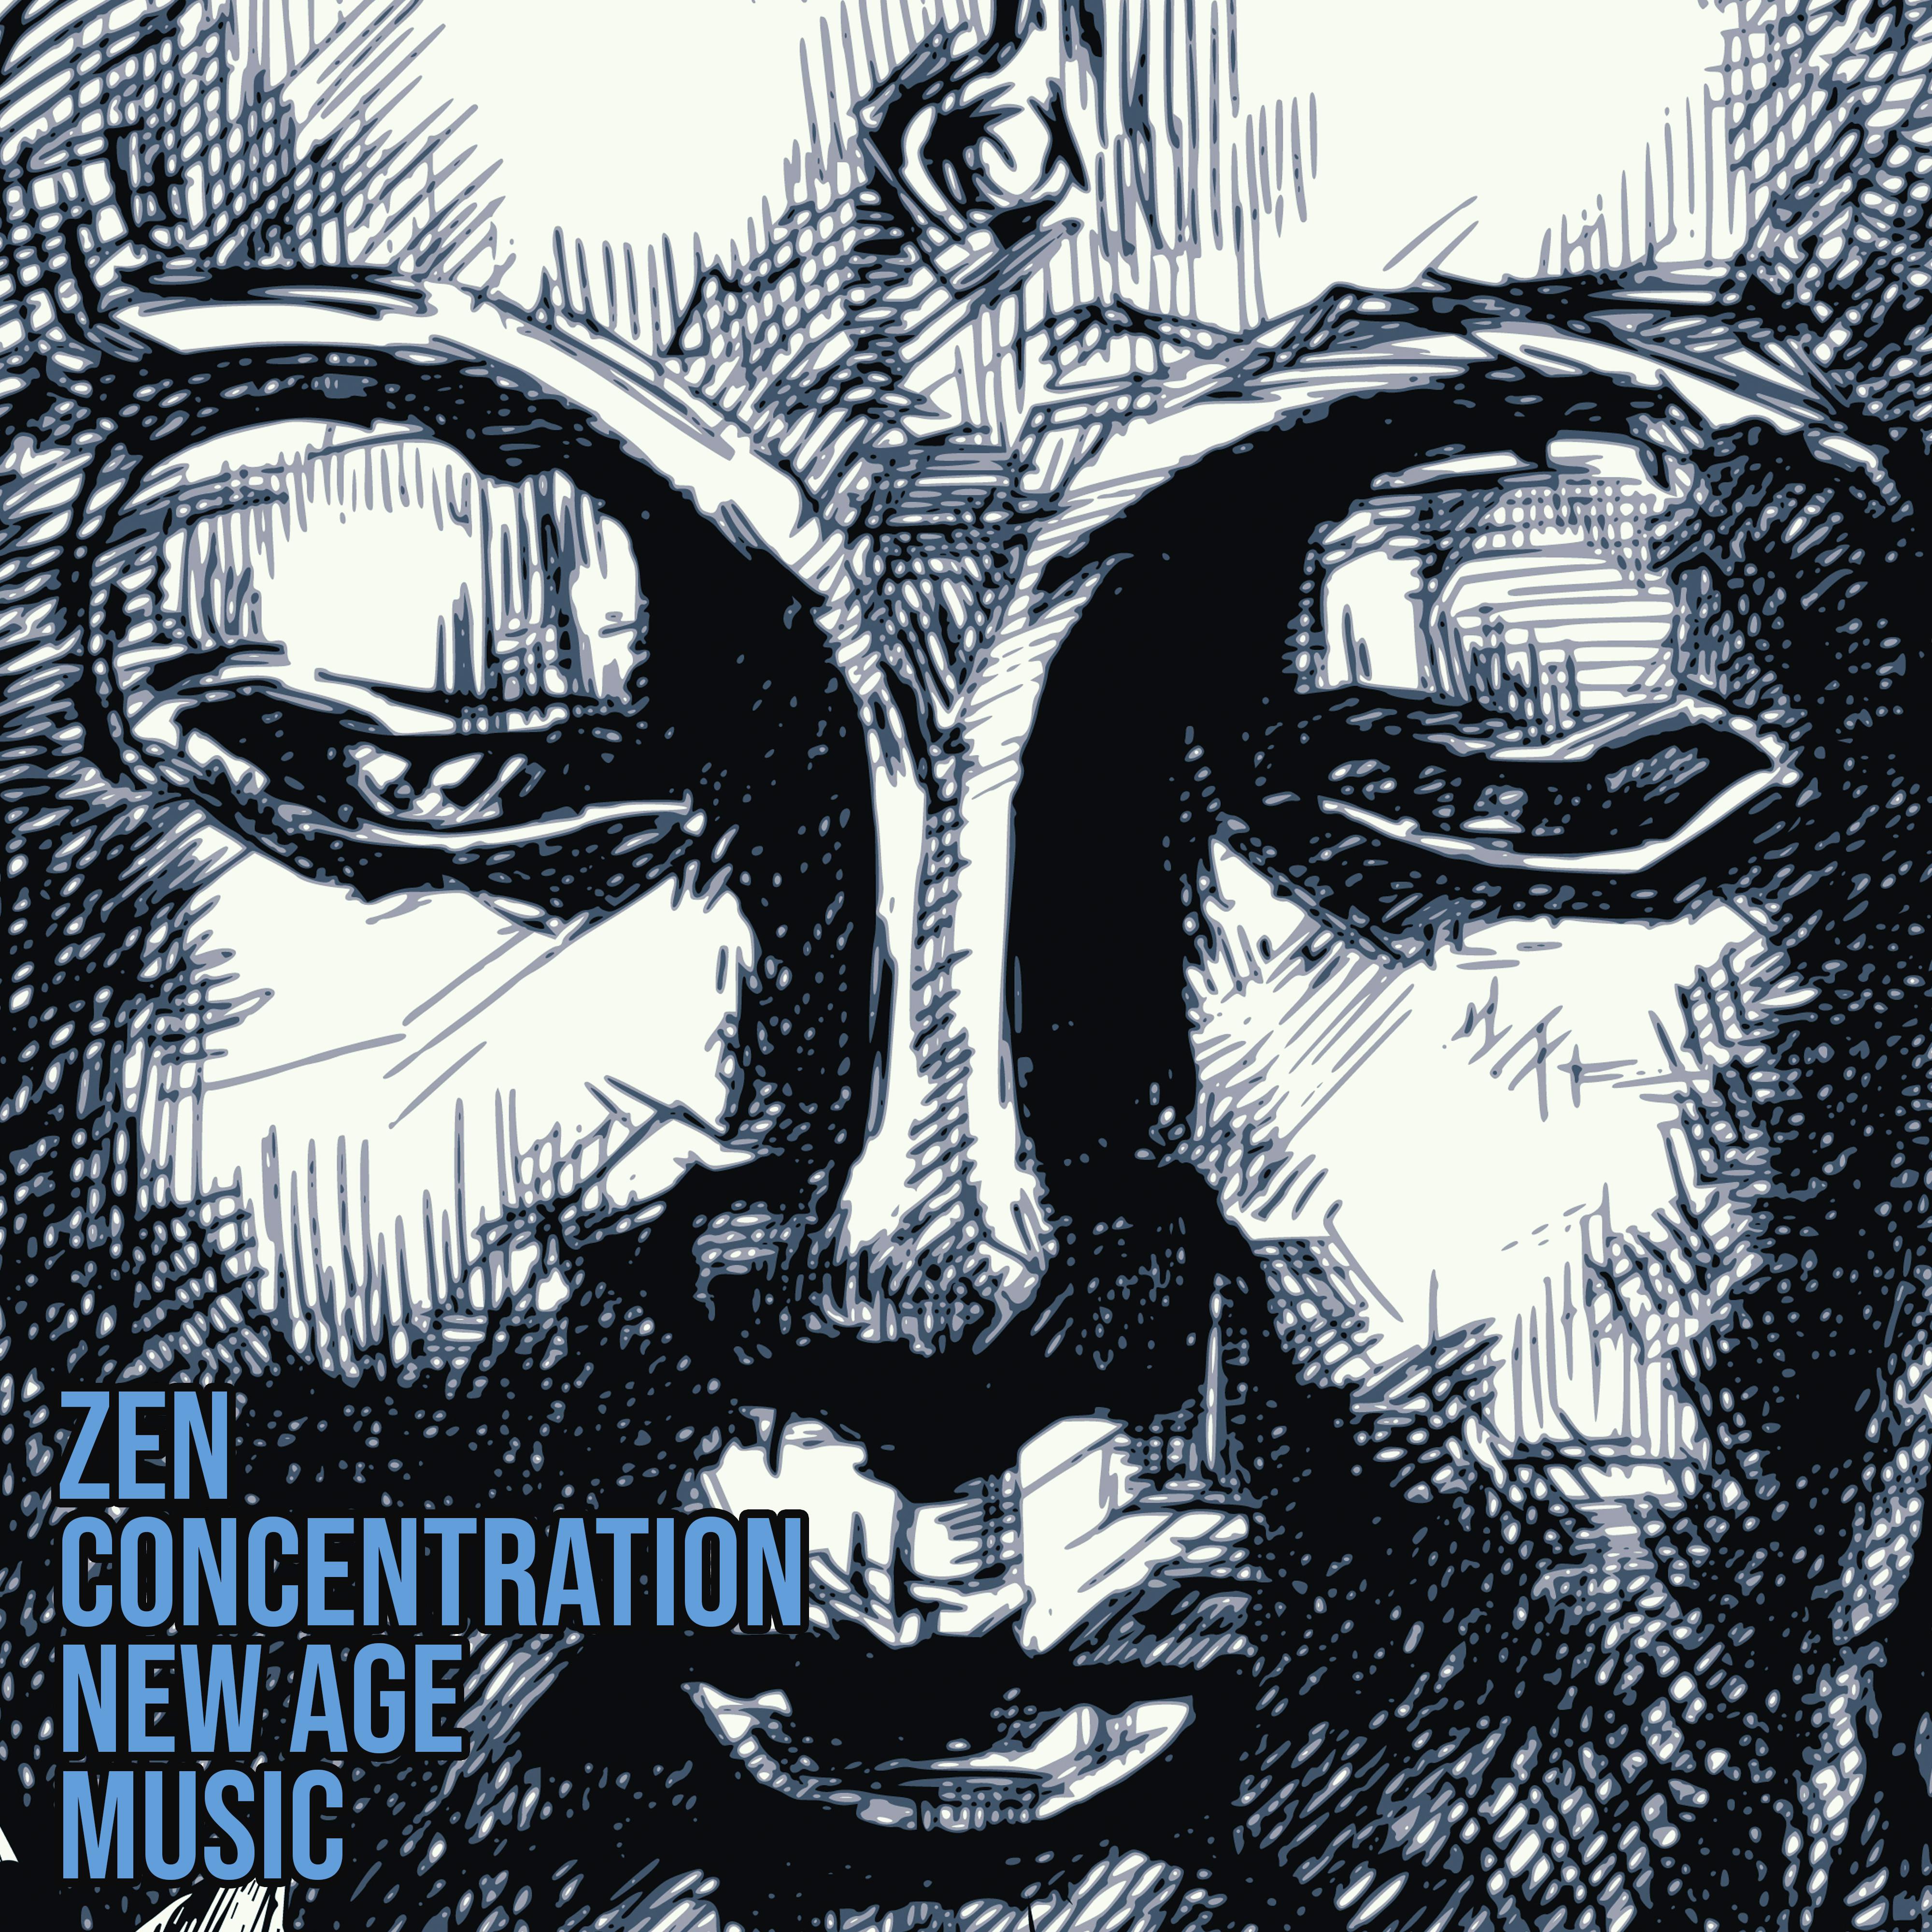 Zen Concentration New Age Music – Soft Sounds for Yoga & Meditation Perfect Experience and Mindfulness Relaxation